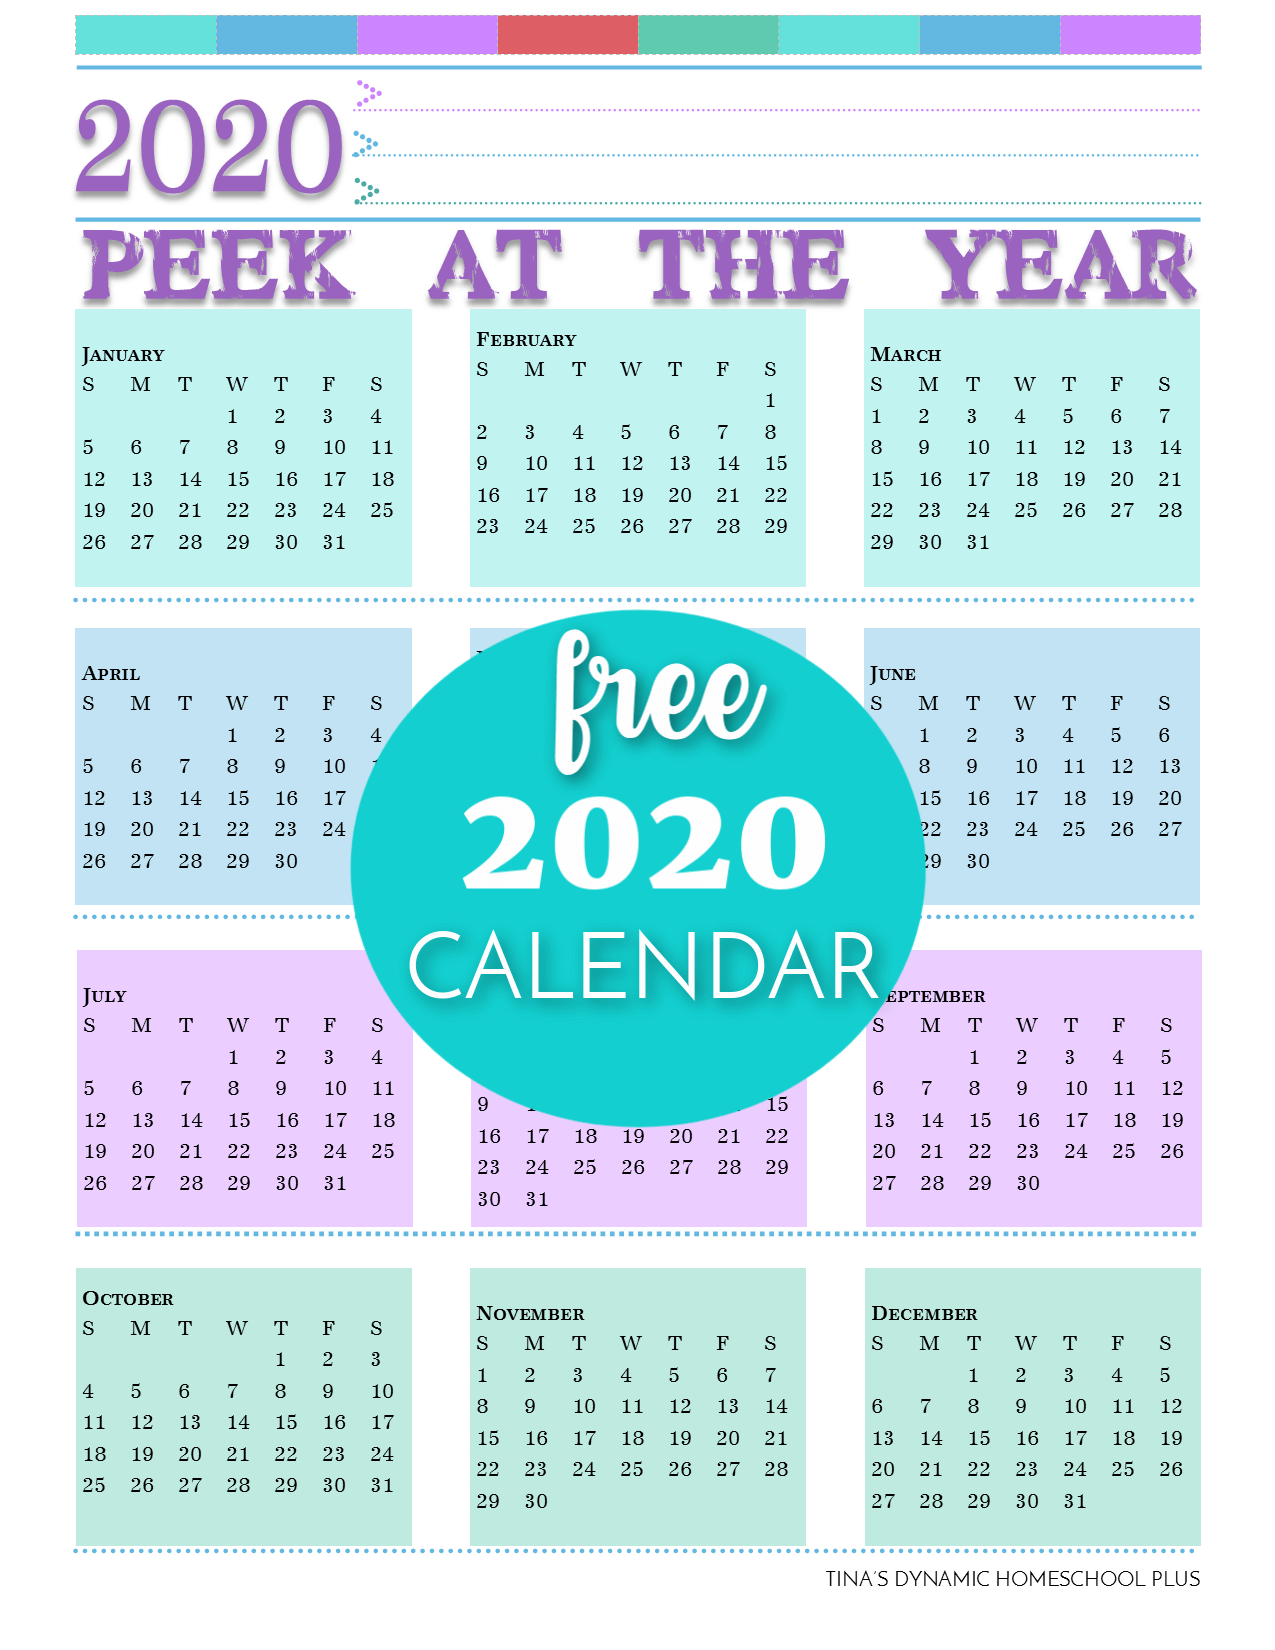 Grab this free BEAUTIFUL and COLORFUL printable 2020 calendar for your homeschool planner or any other planner. CLICK HERE to grab your FREE calendar!